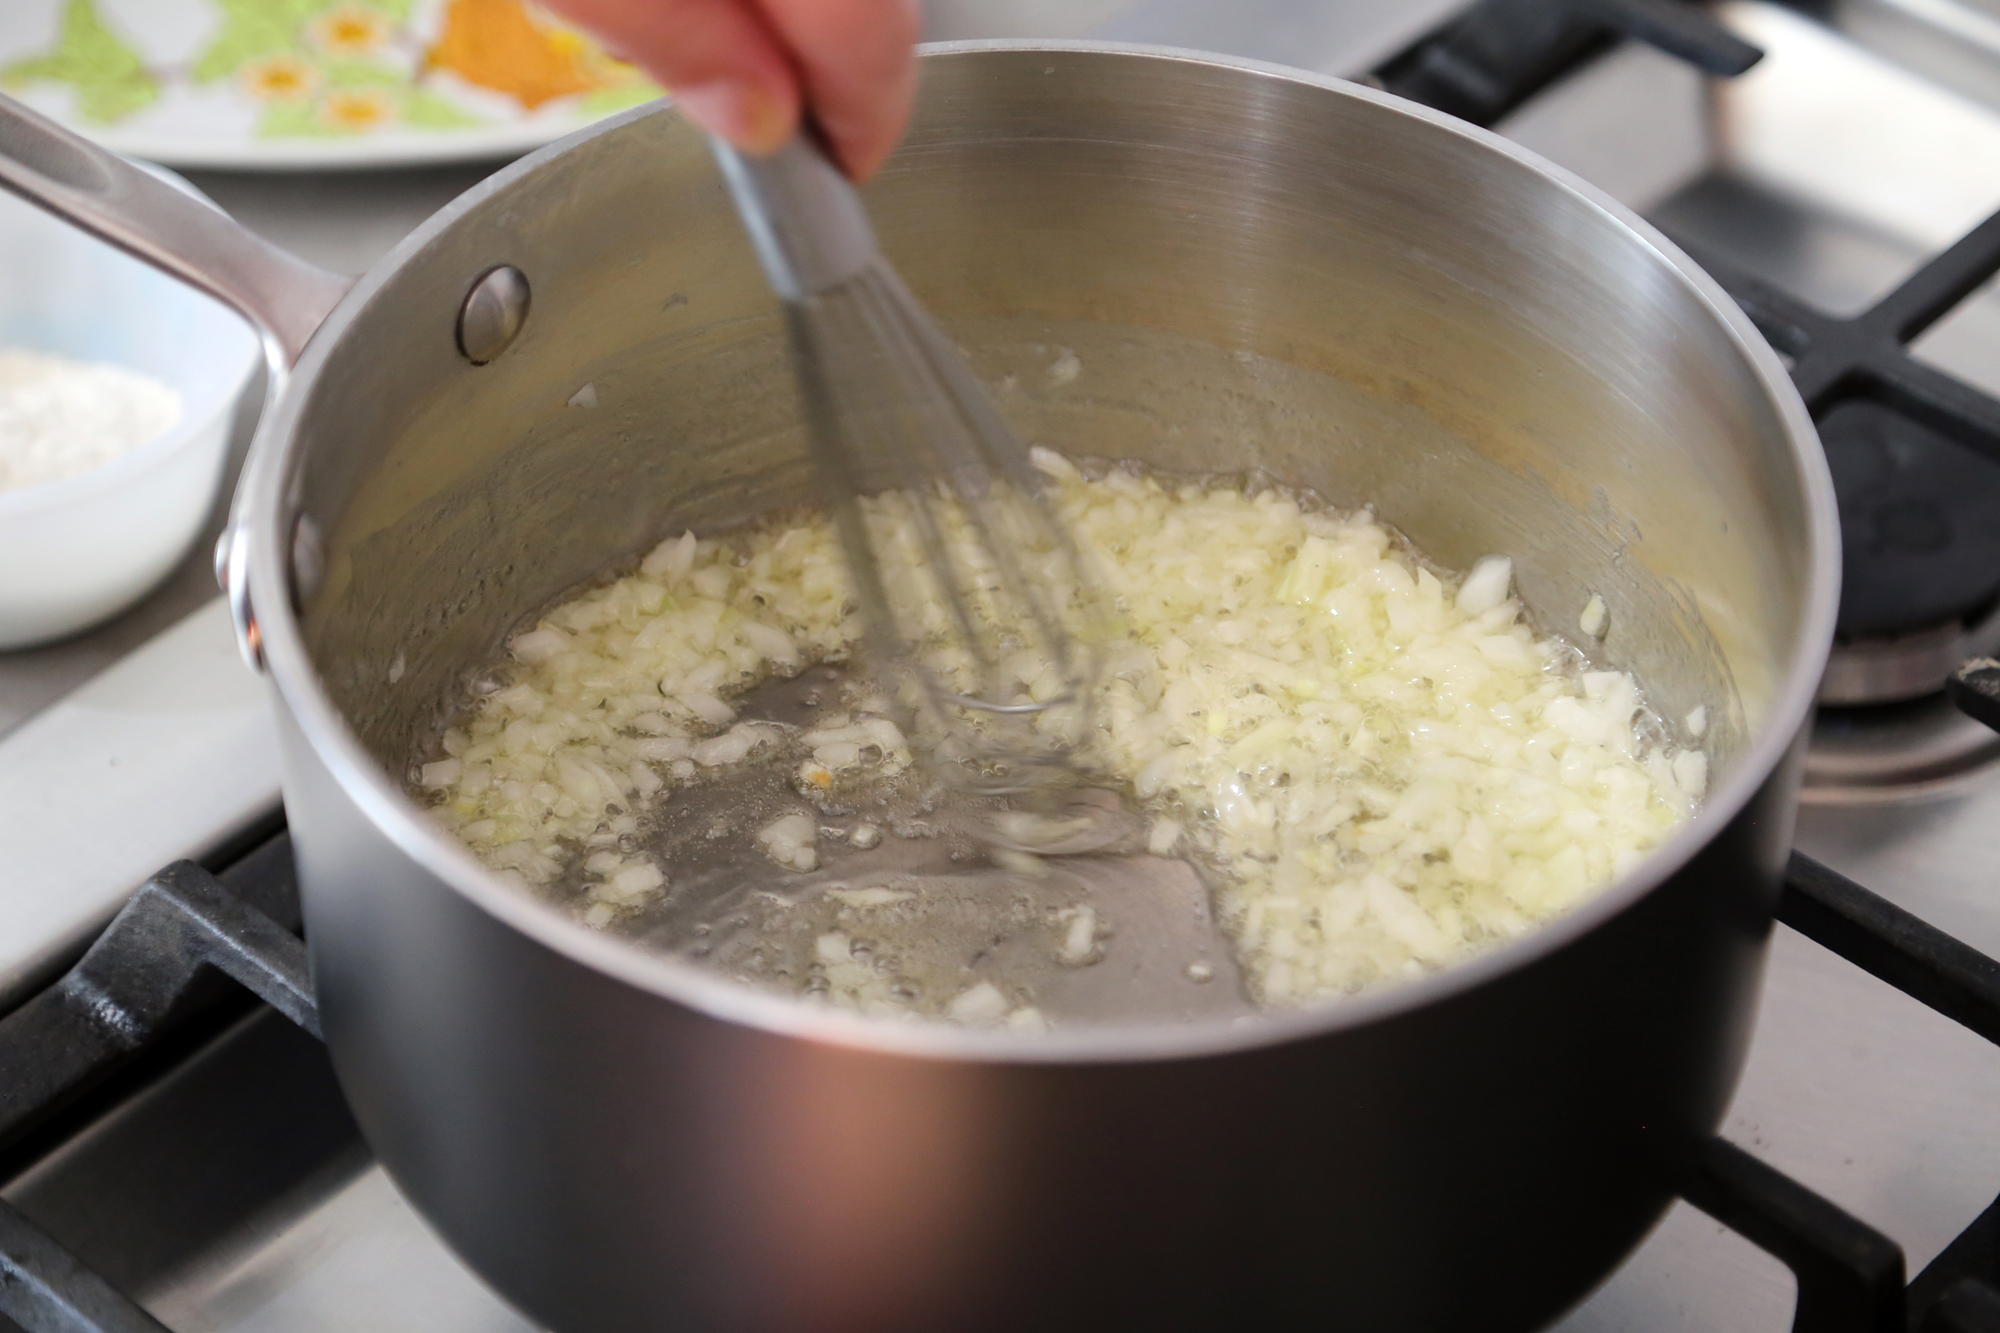 In the same saucepan, melt the butter over medium heat. Add the onion and sauté until tender and golden, about 7 minutes.